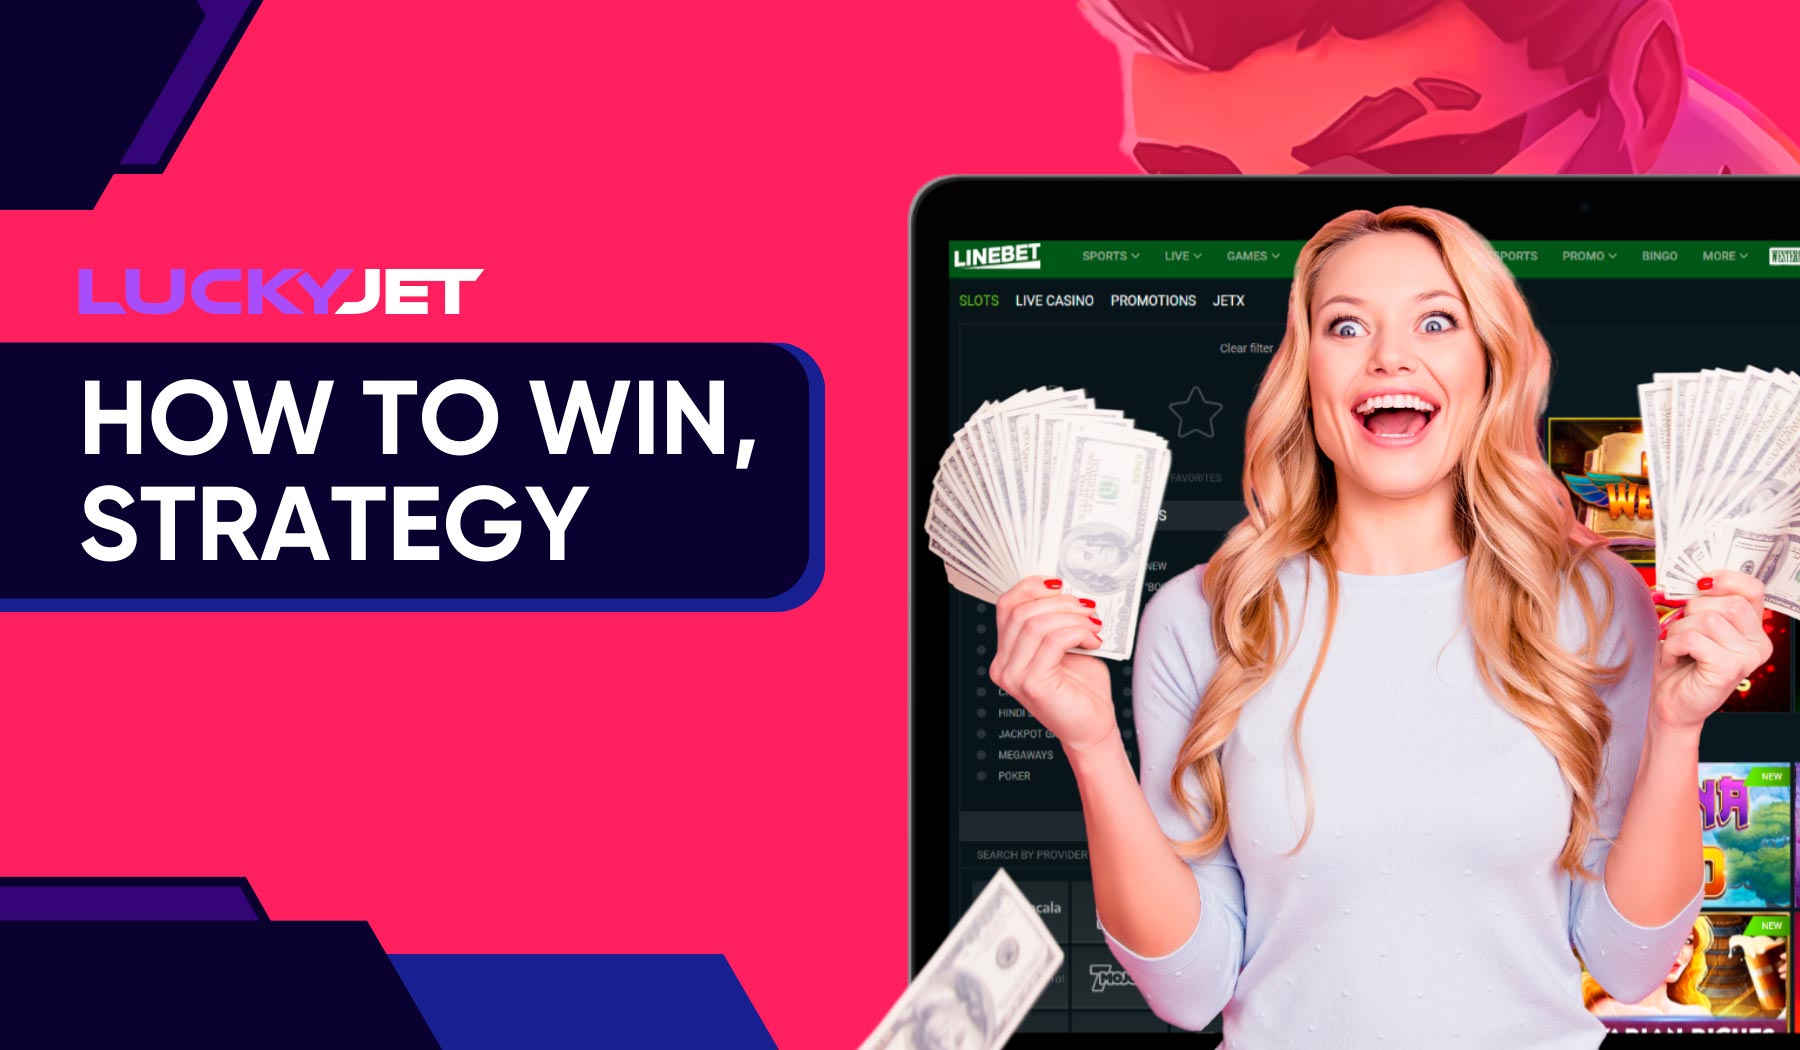 Strategies and Tips to Win Linebet Lucky Jet